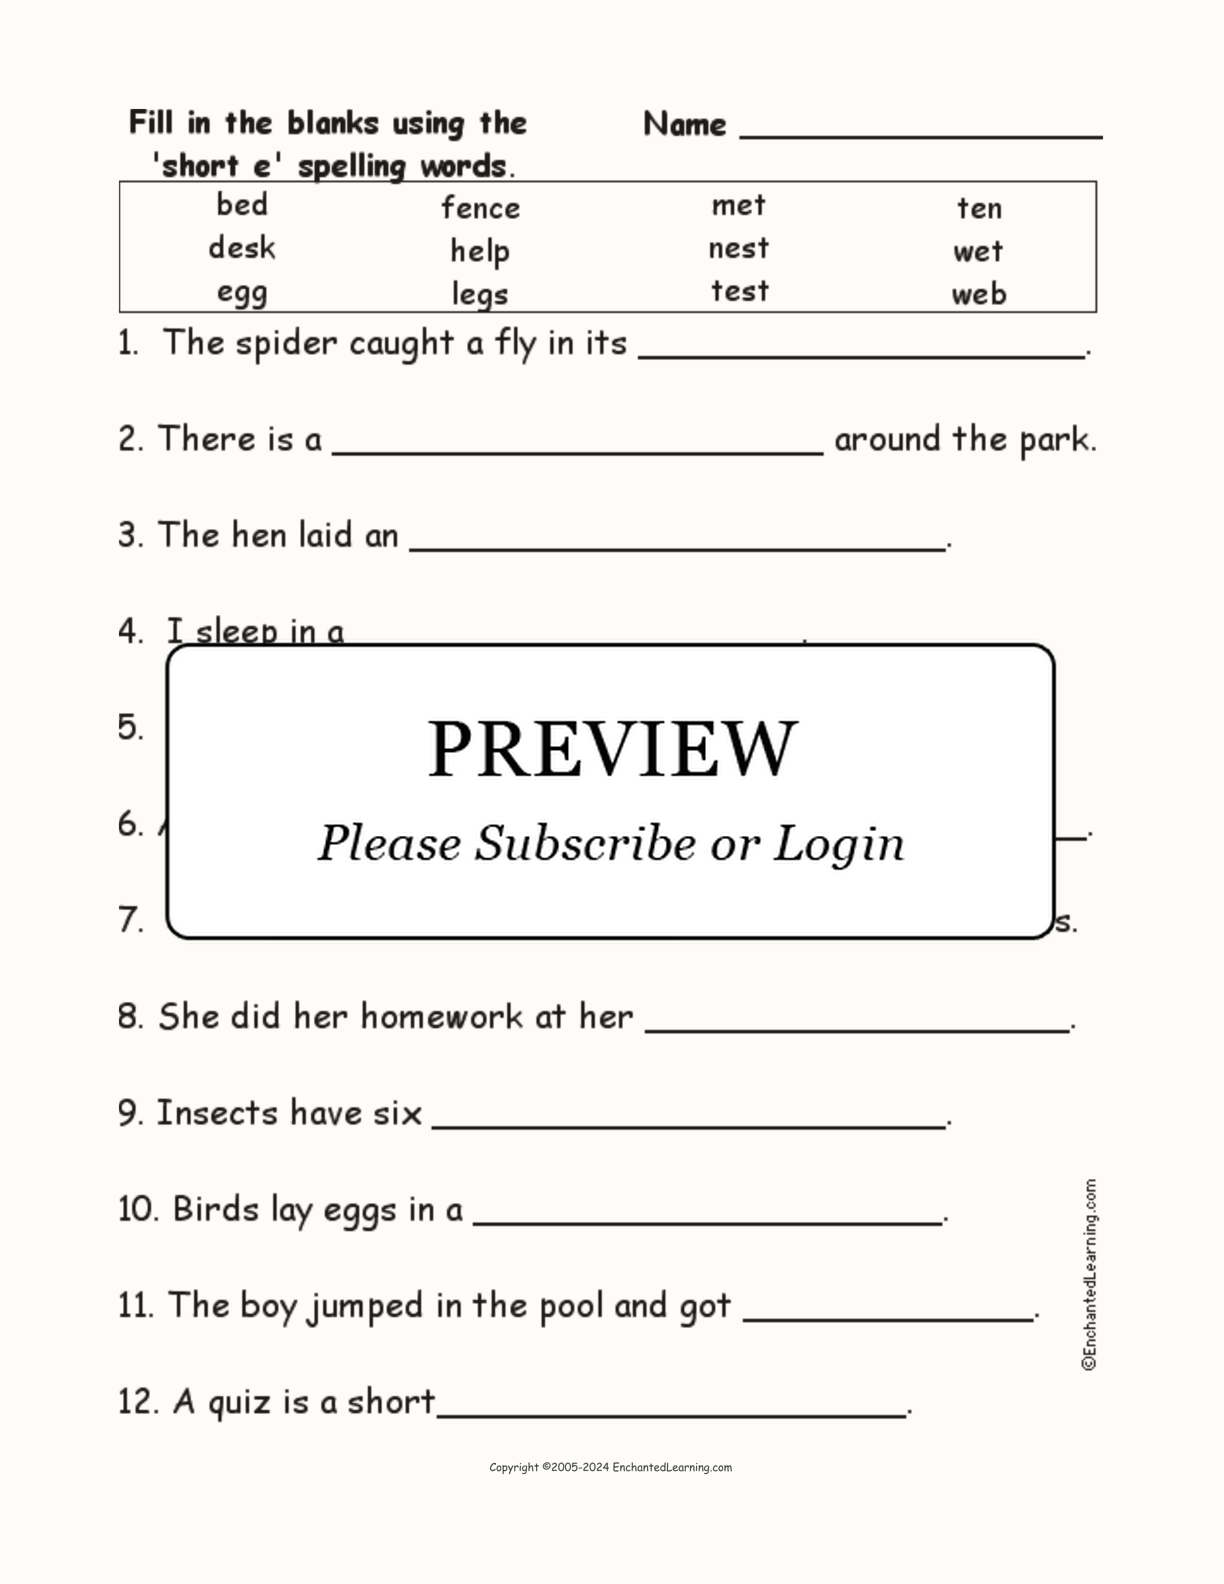 Short E: Spelling Word Questions interactive worksheet page 1